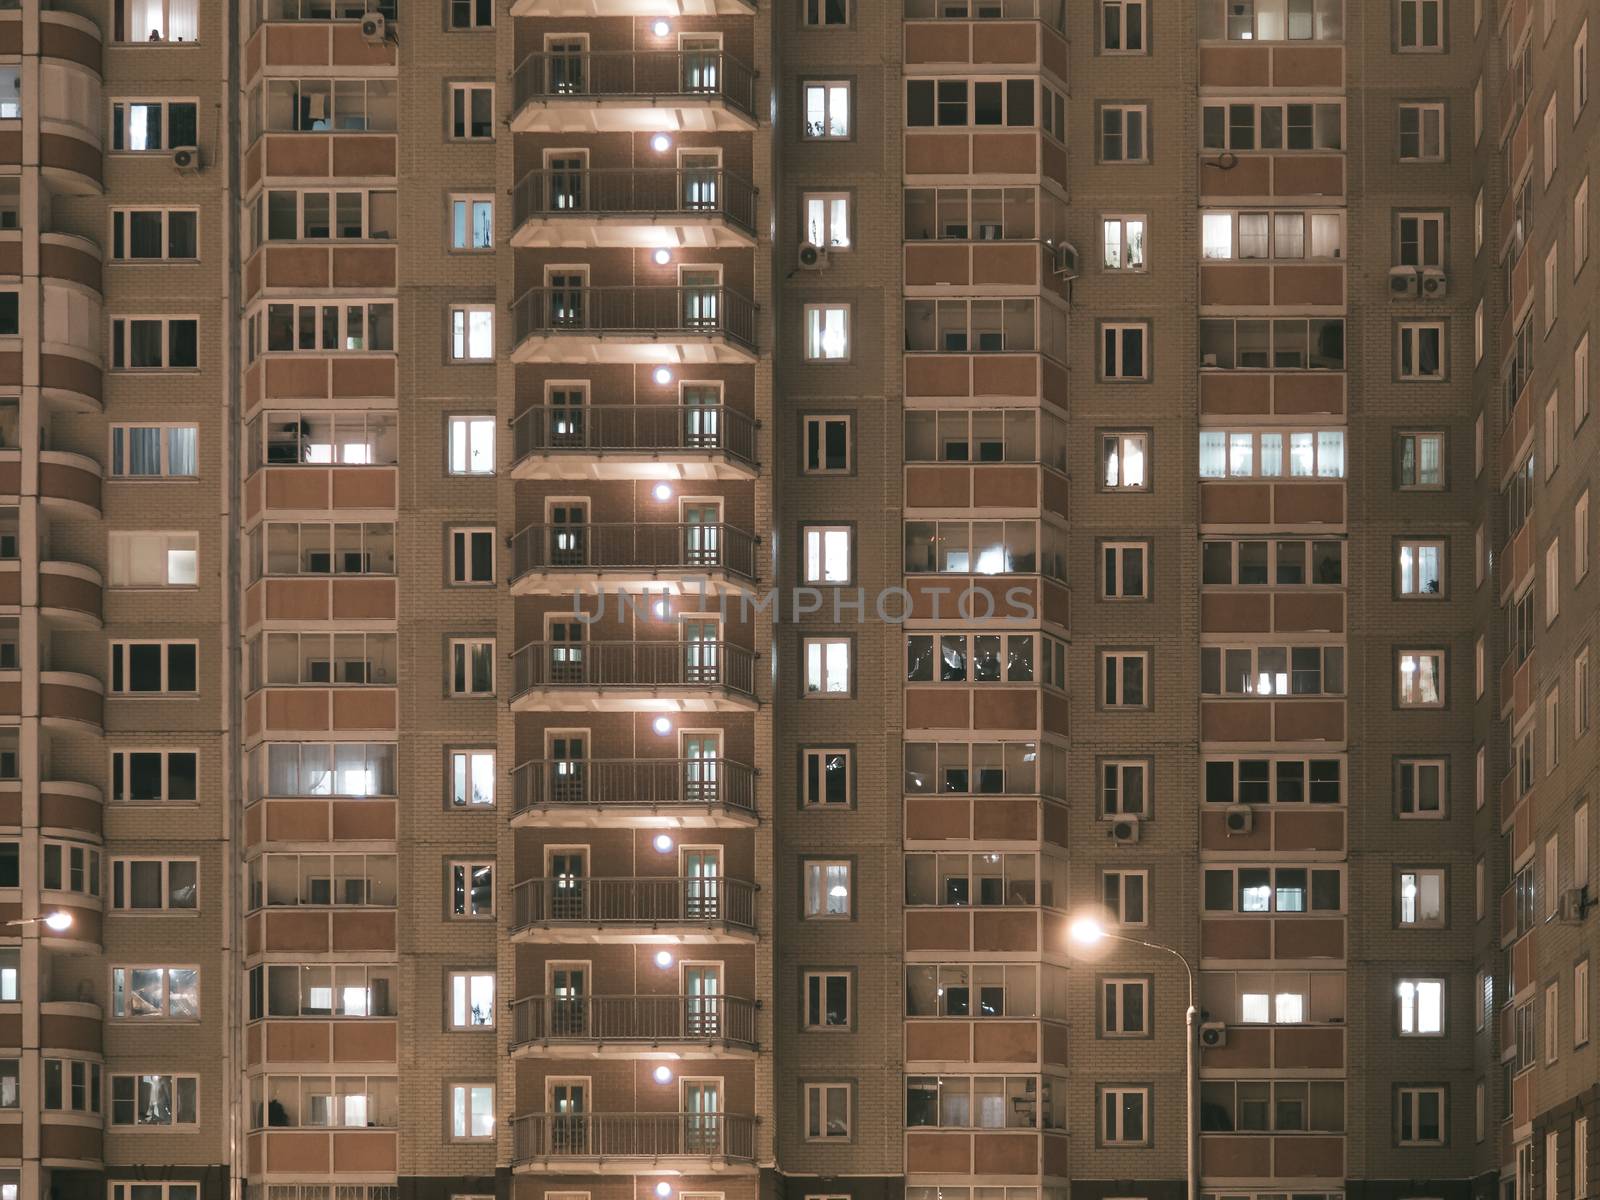 Apartment building in night by fascinadora